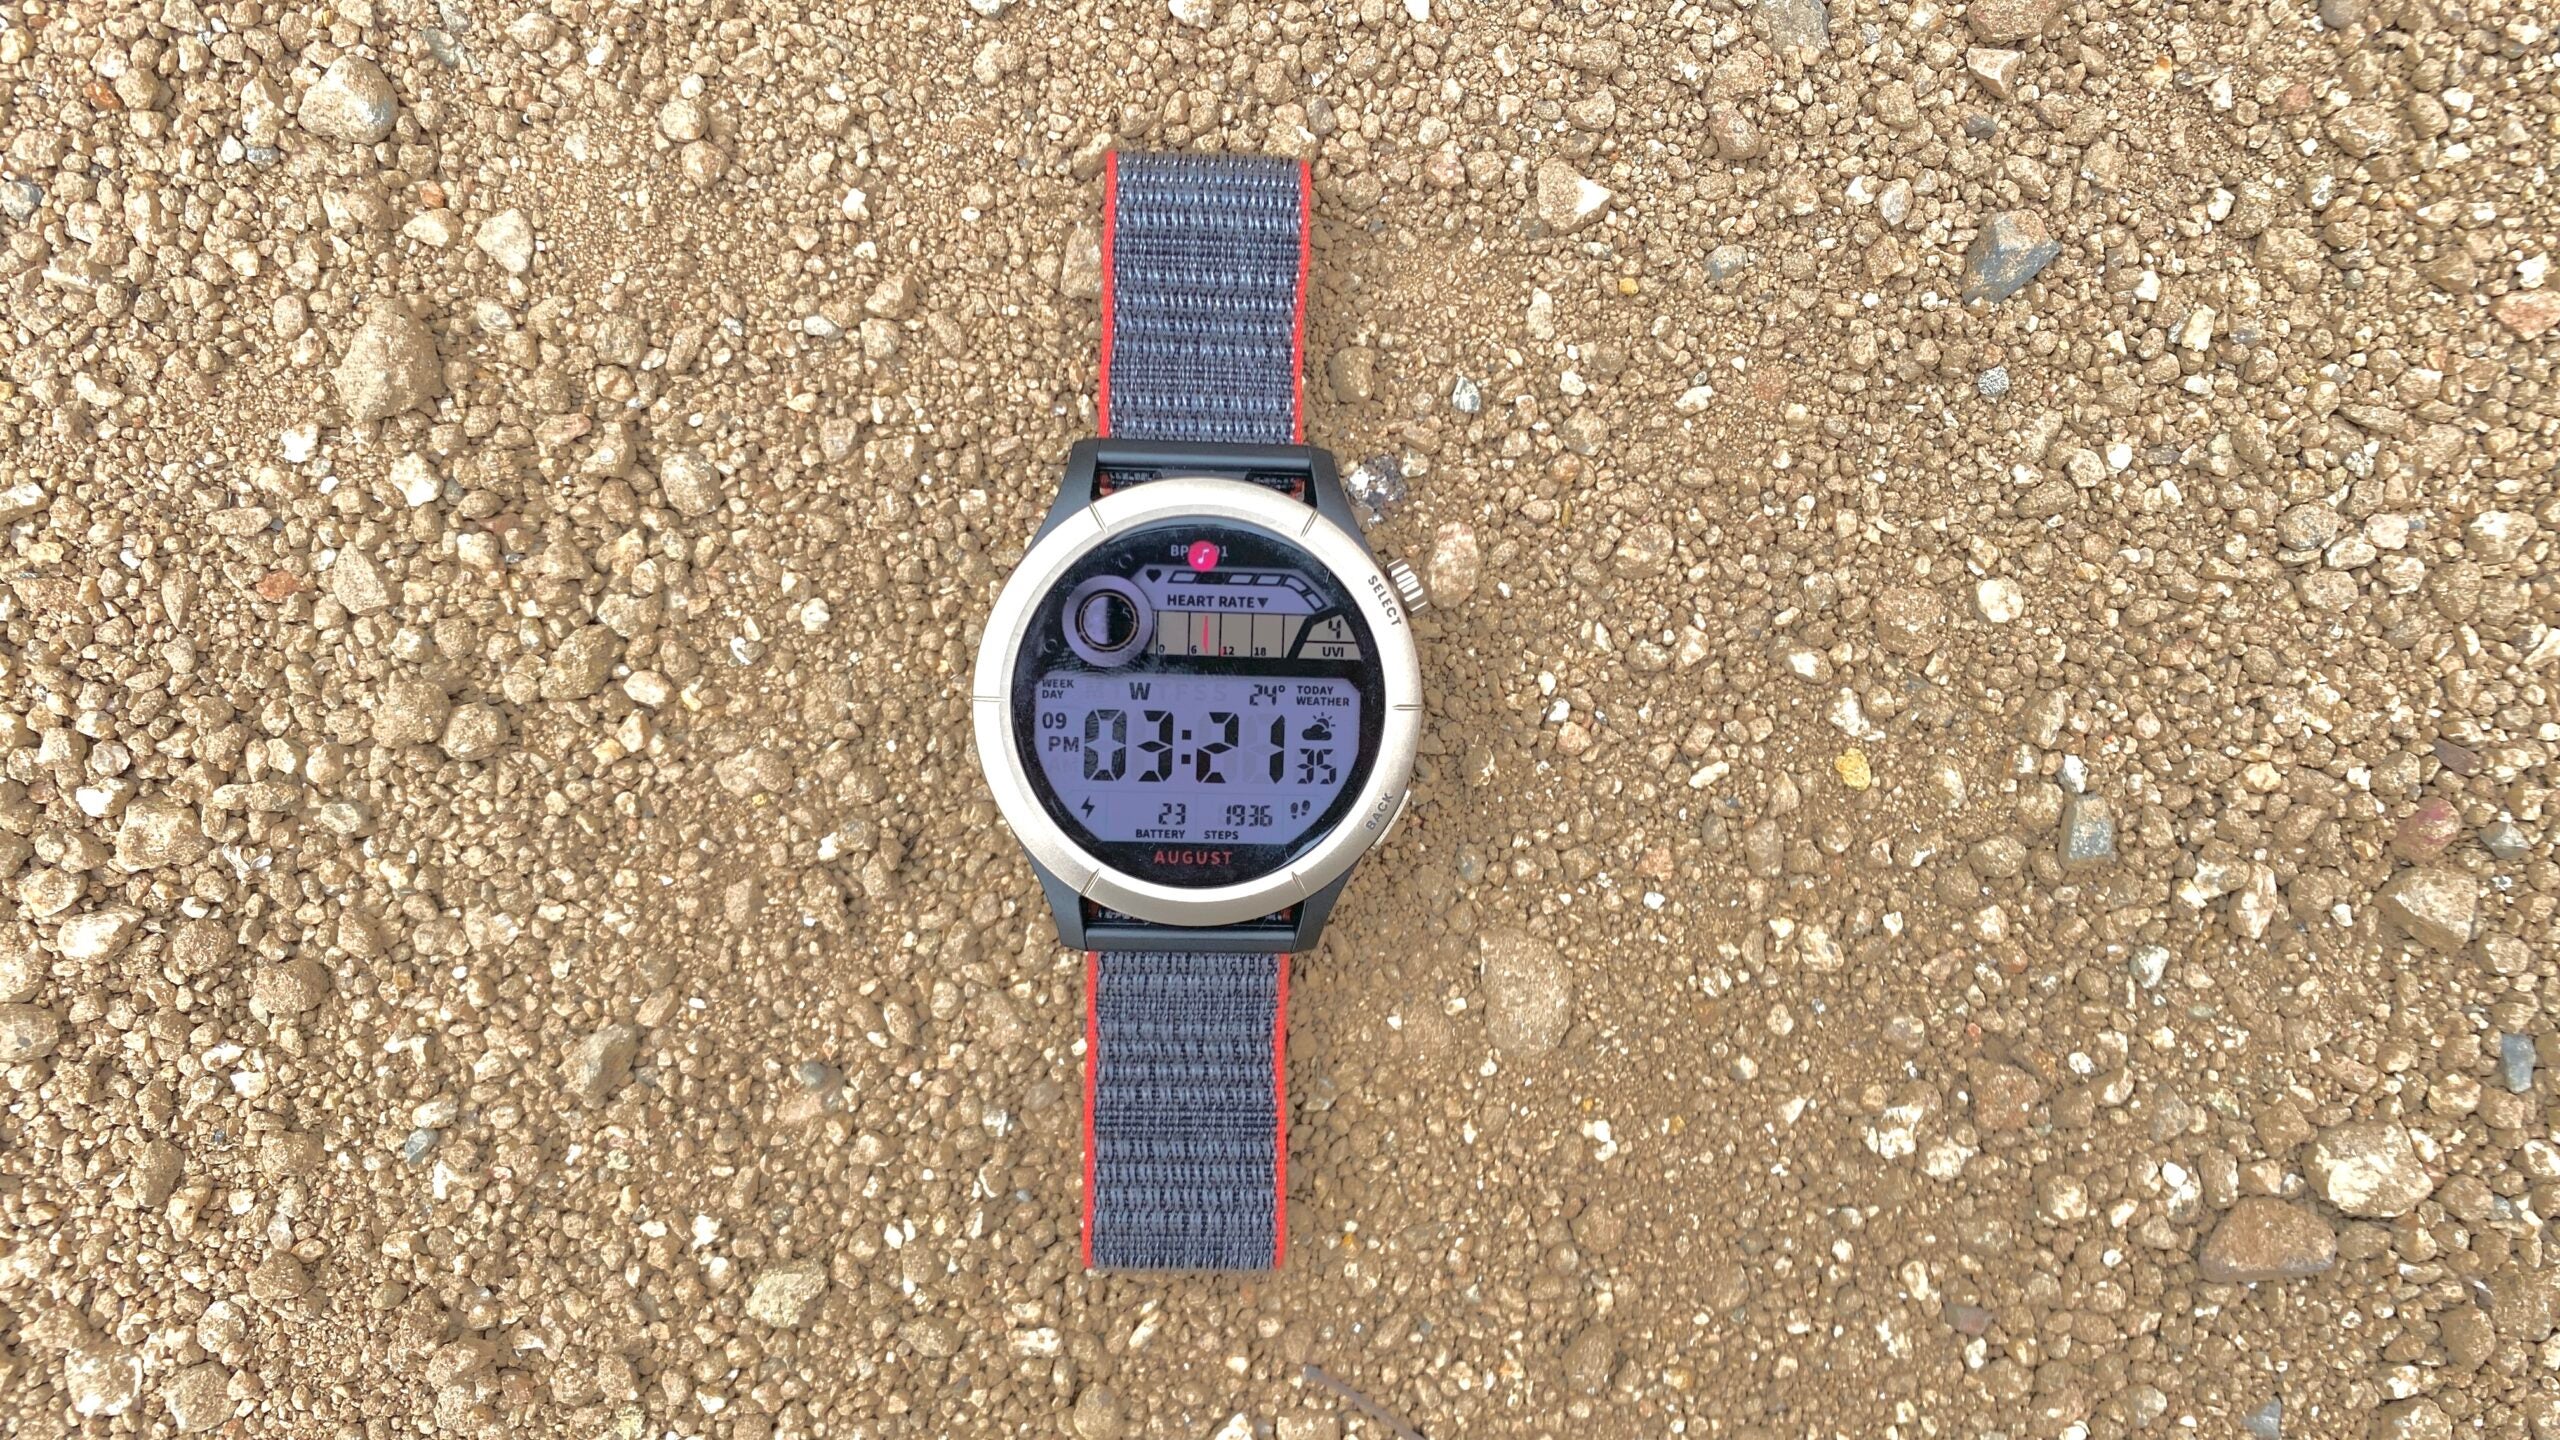 Amazfit Cheetah Pro Review: The Almost PERFECT Sporty Smart Watch